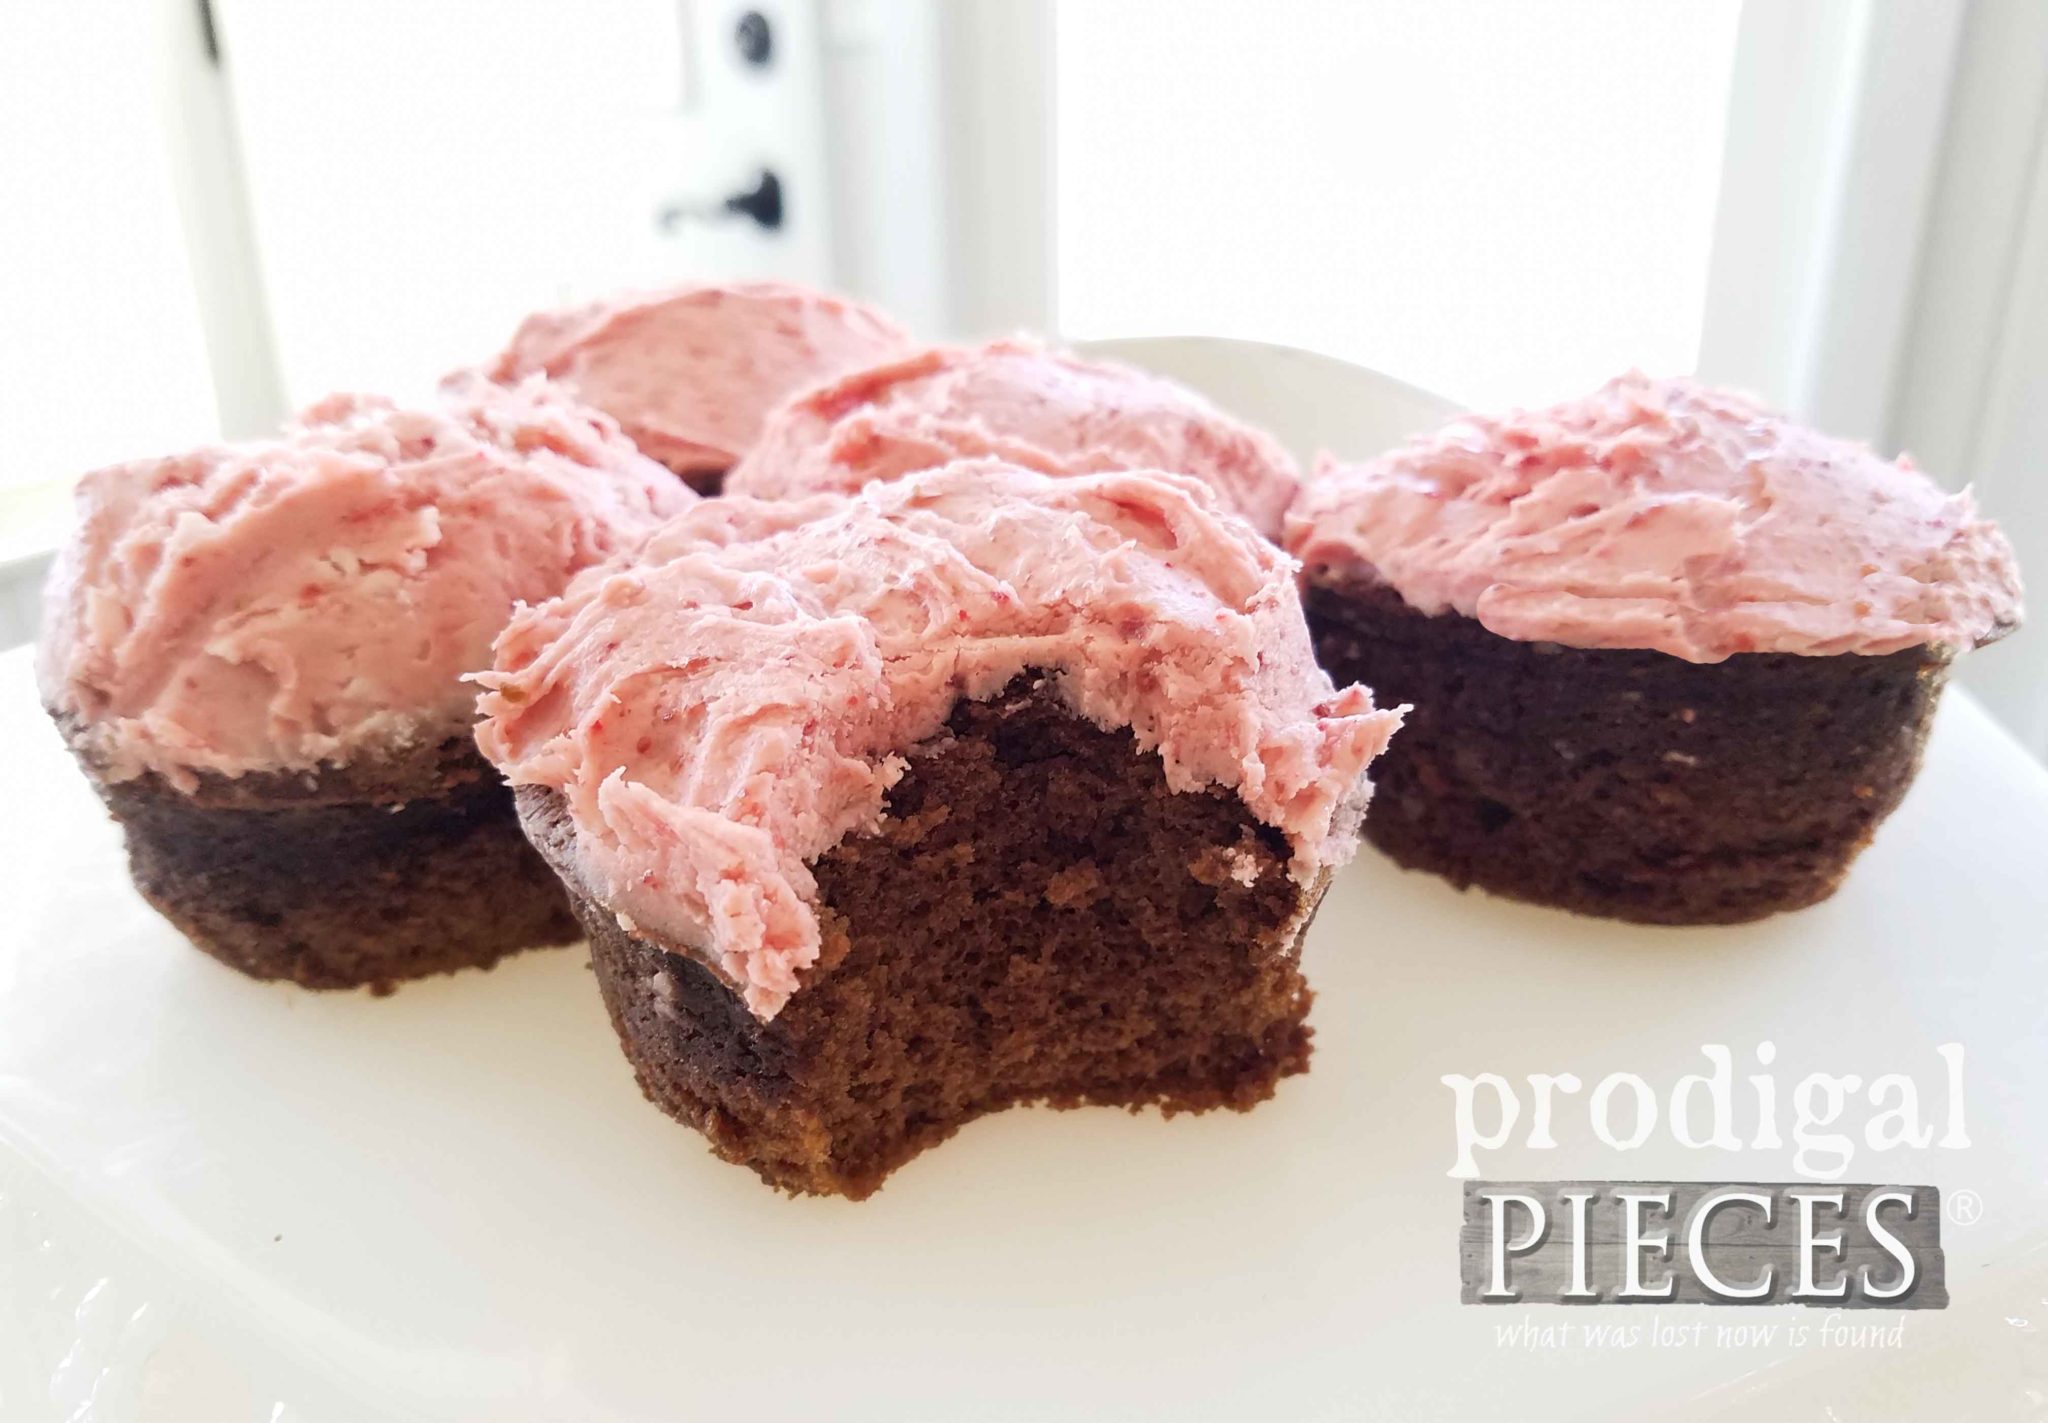 Gluten-Free Chocolate Cupcake Recipe with Real Strawberry Frosting by Prodigal Pieces | prodigalpieces.com